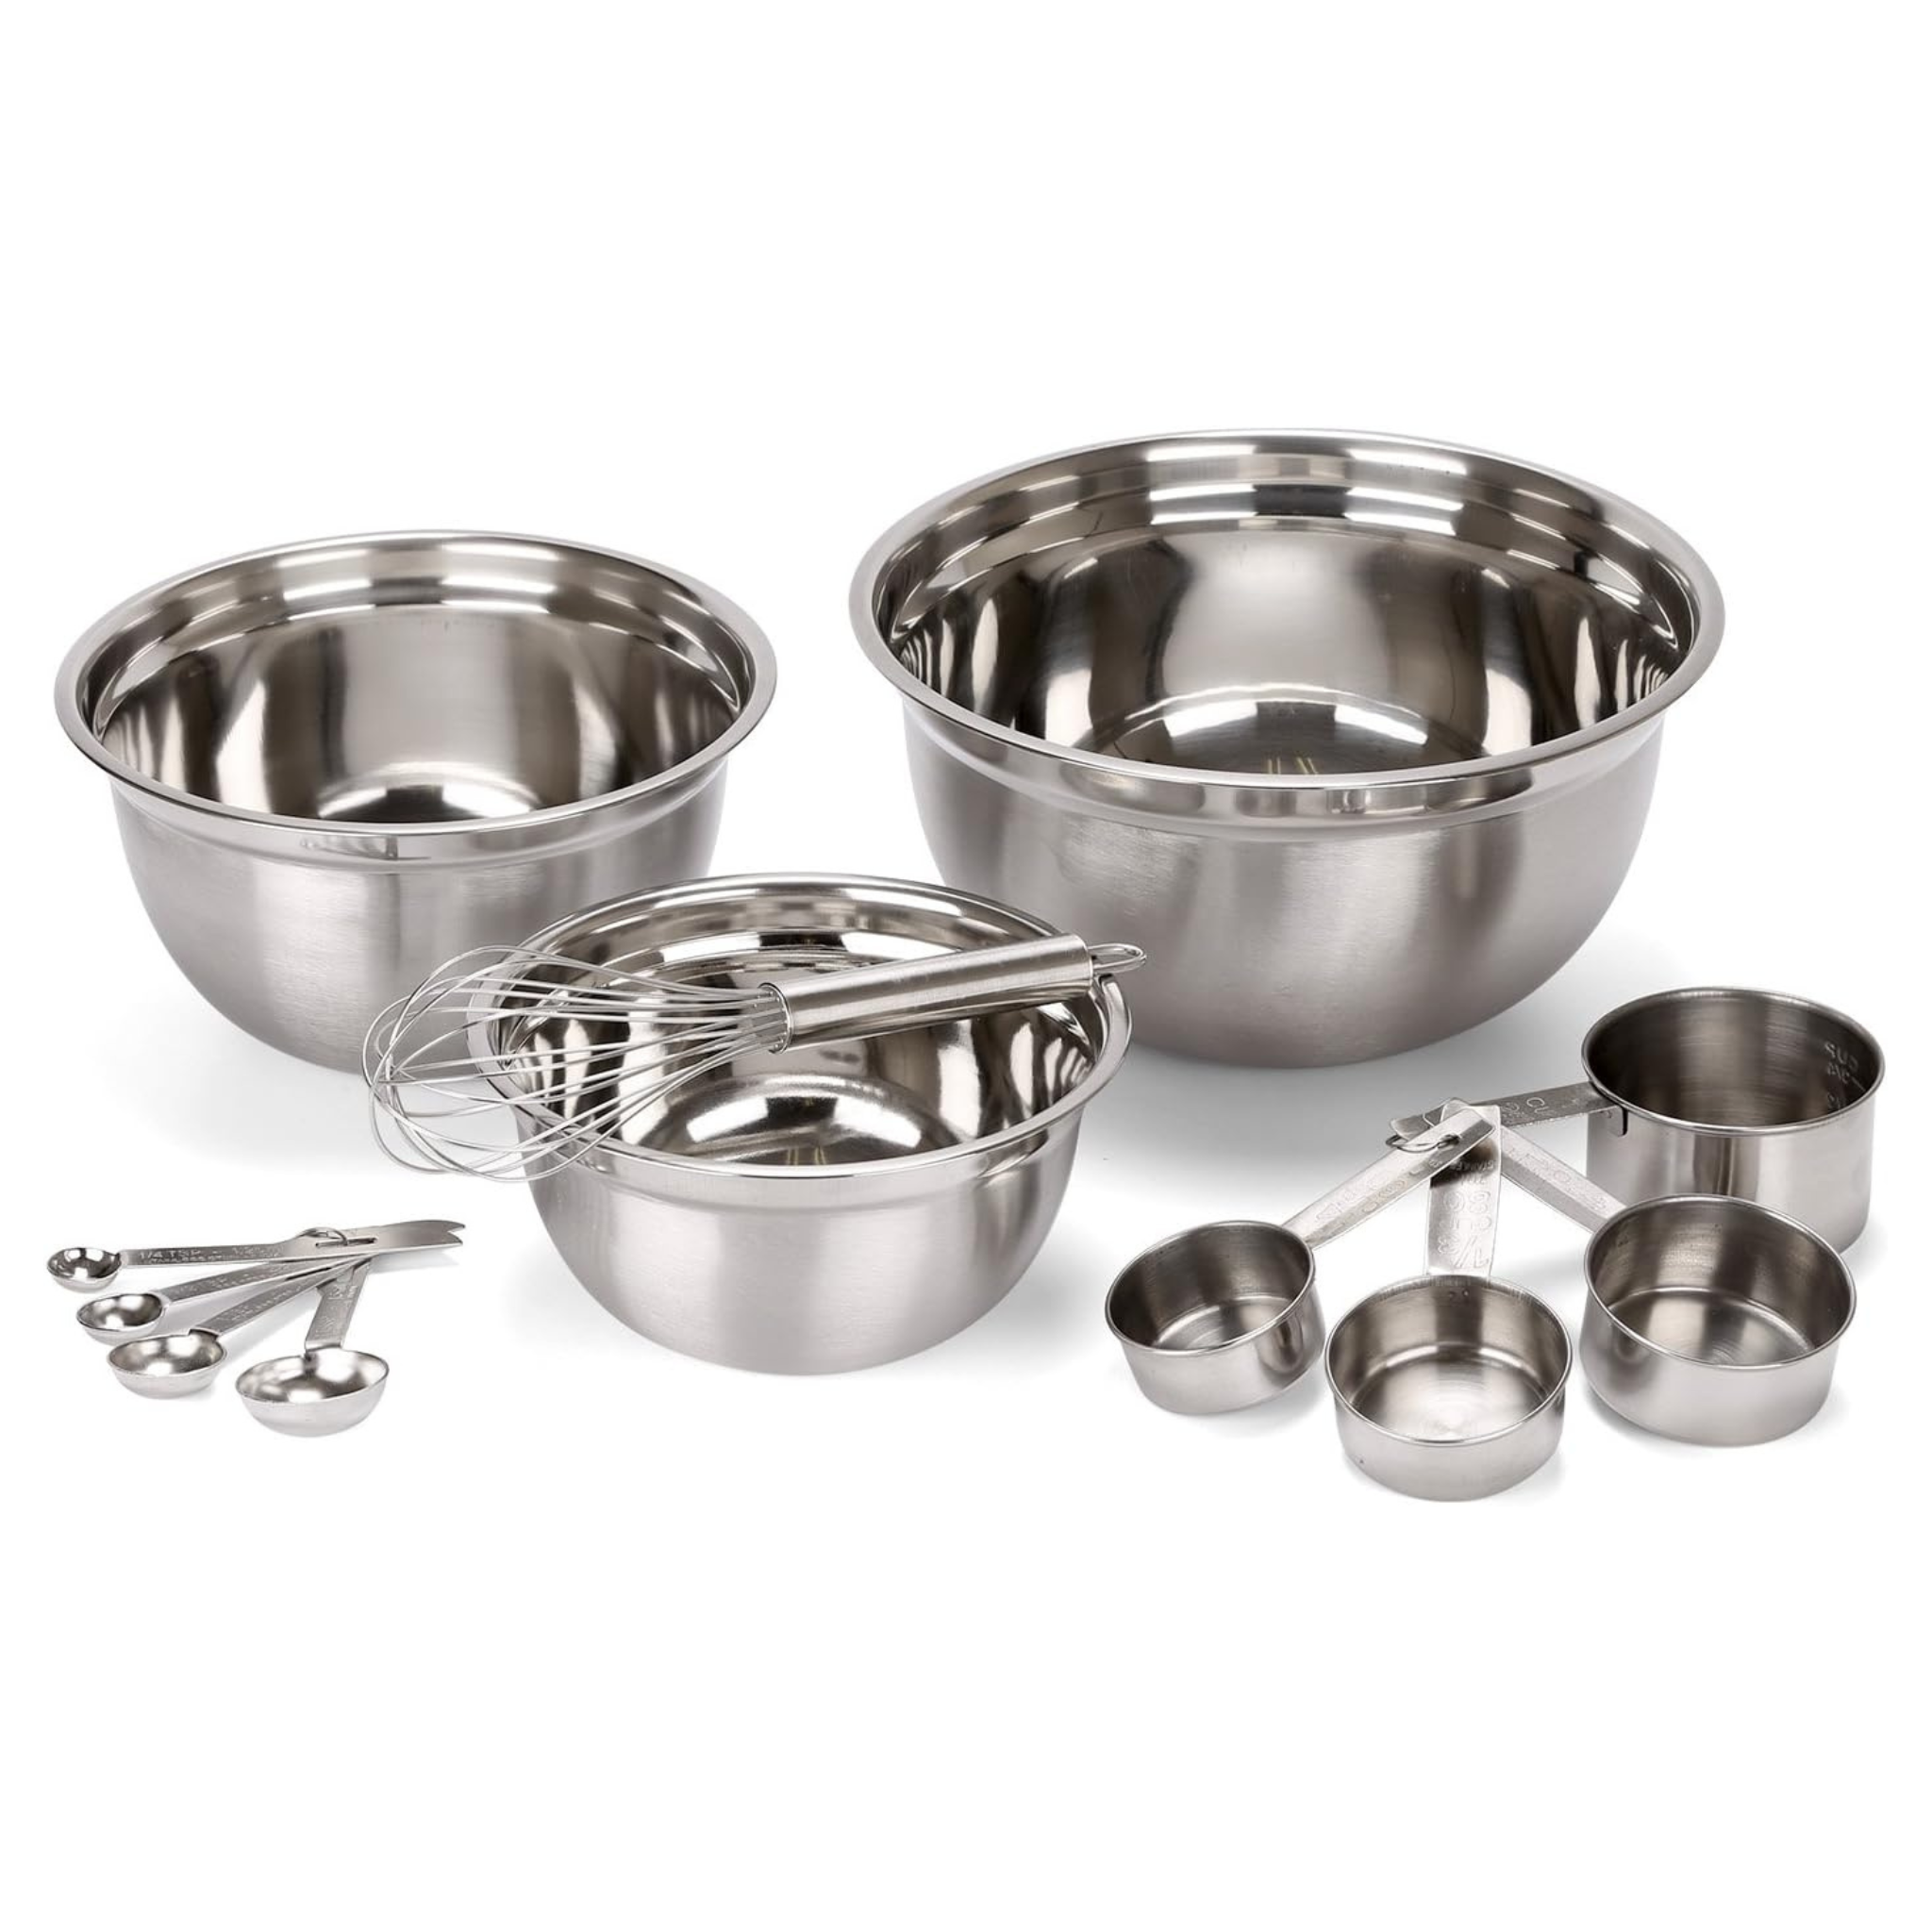 12 Piece Stainless Steel Metal Mixing Bowl & Accessories